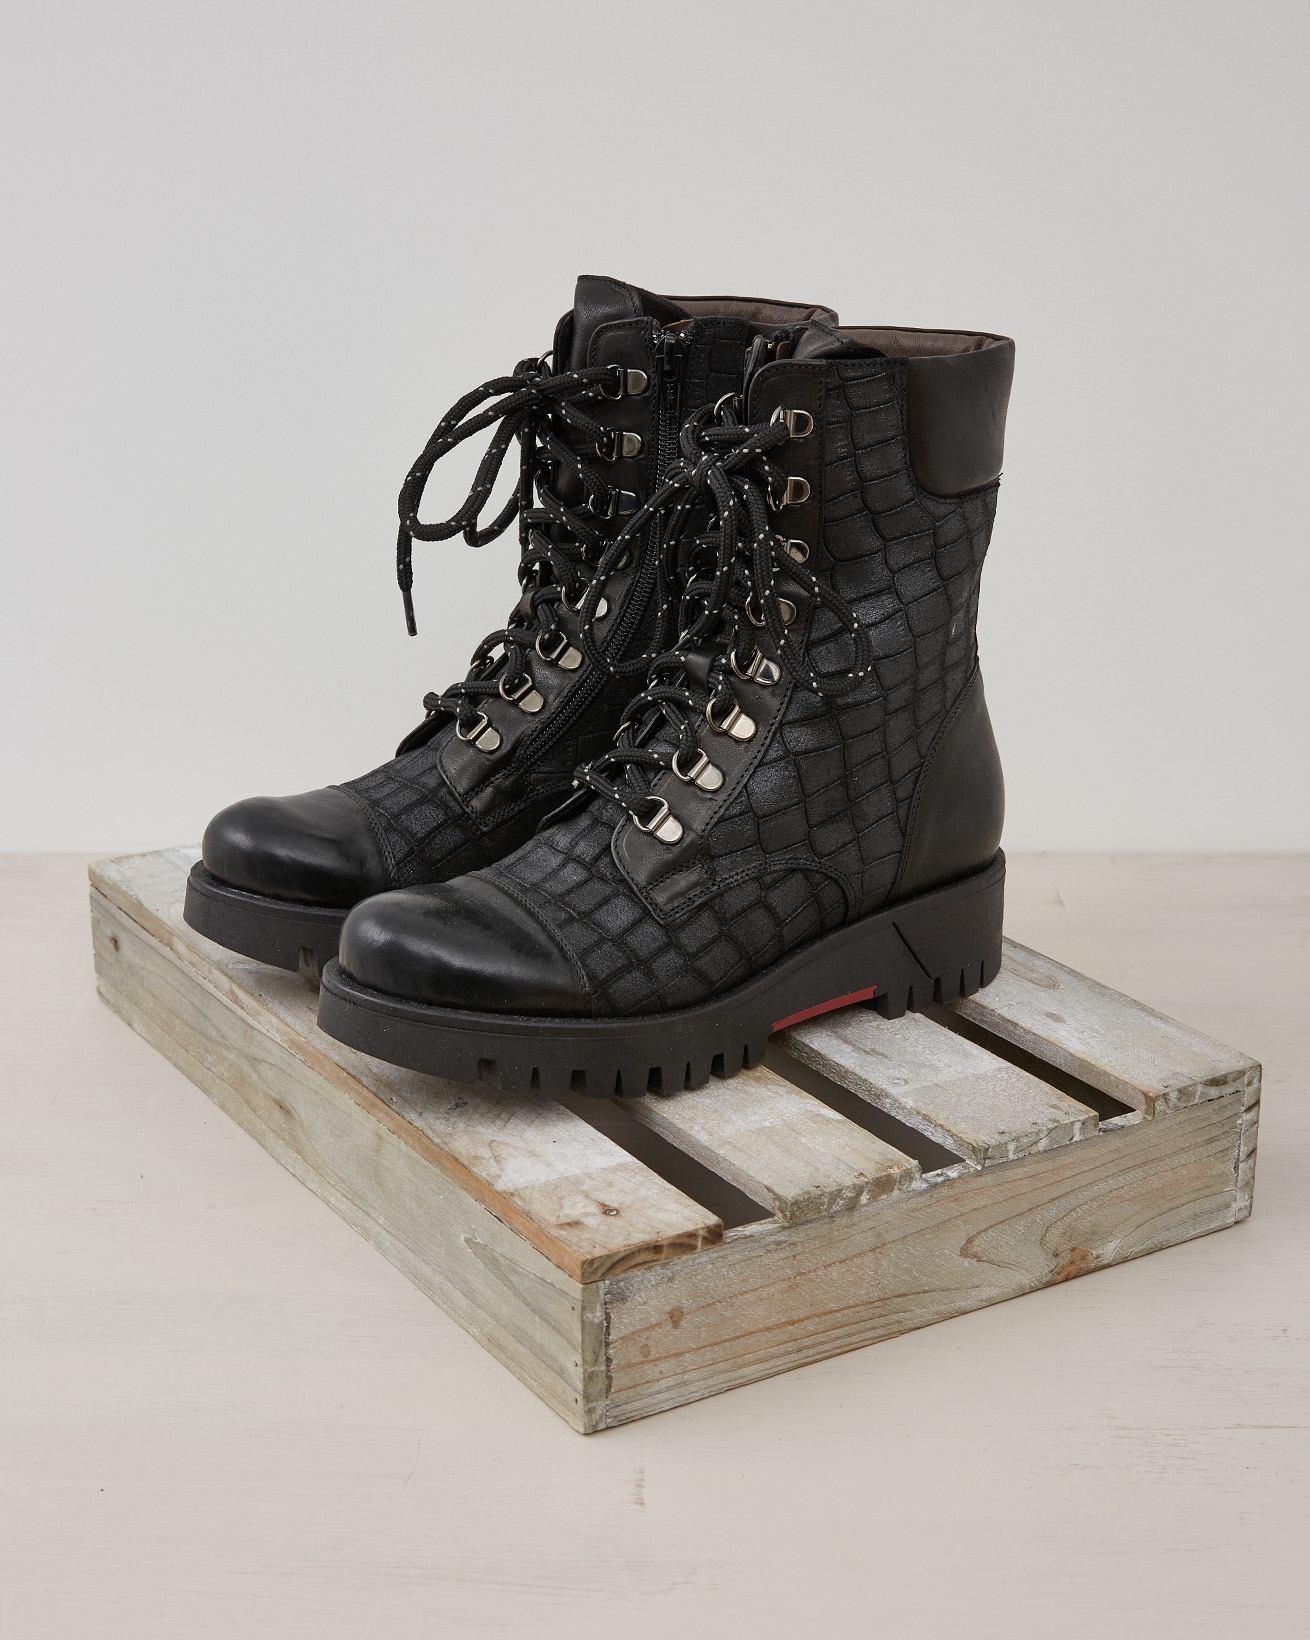 2444 - leather croc embossed lace up boot - black - size 37.jpg